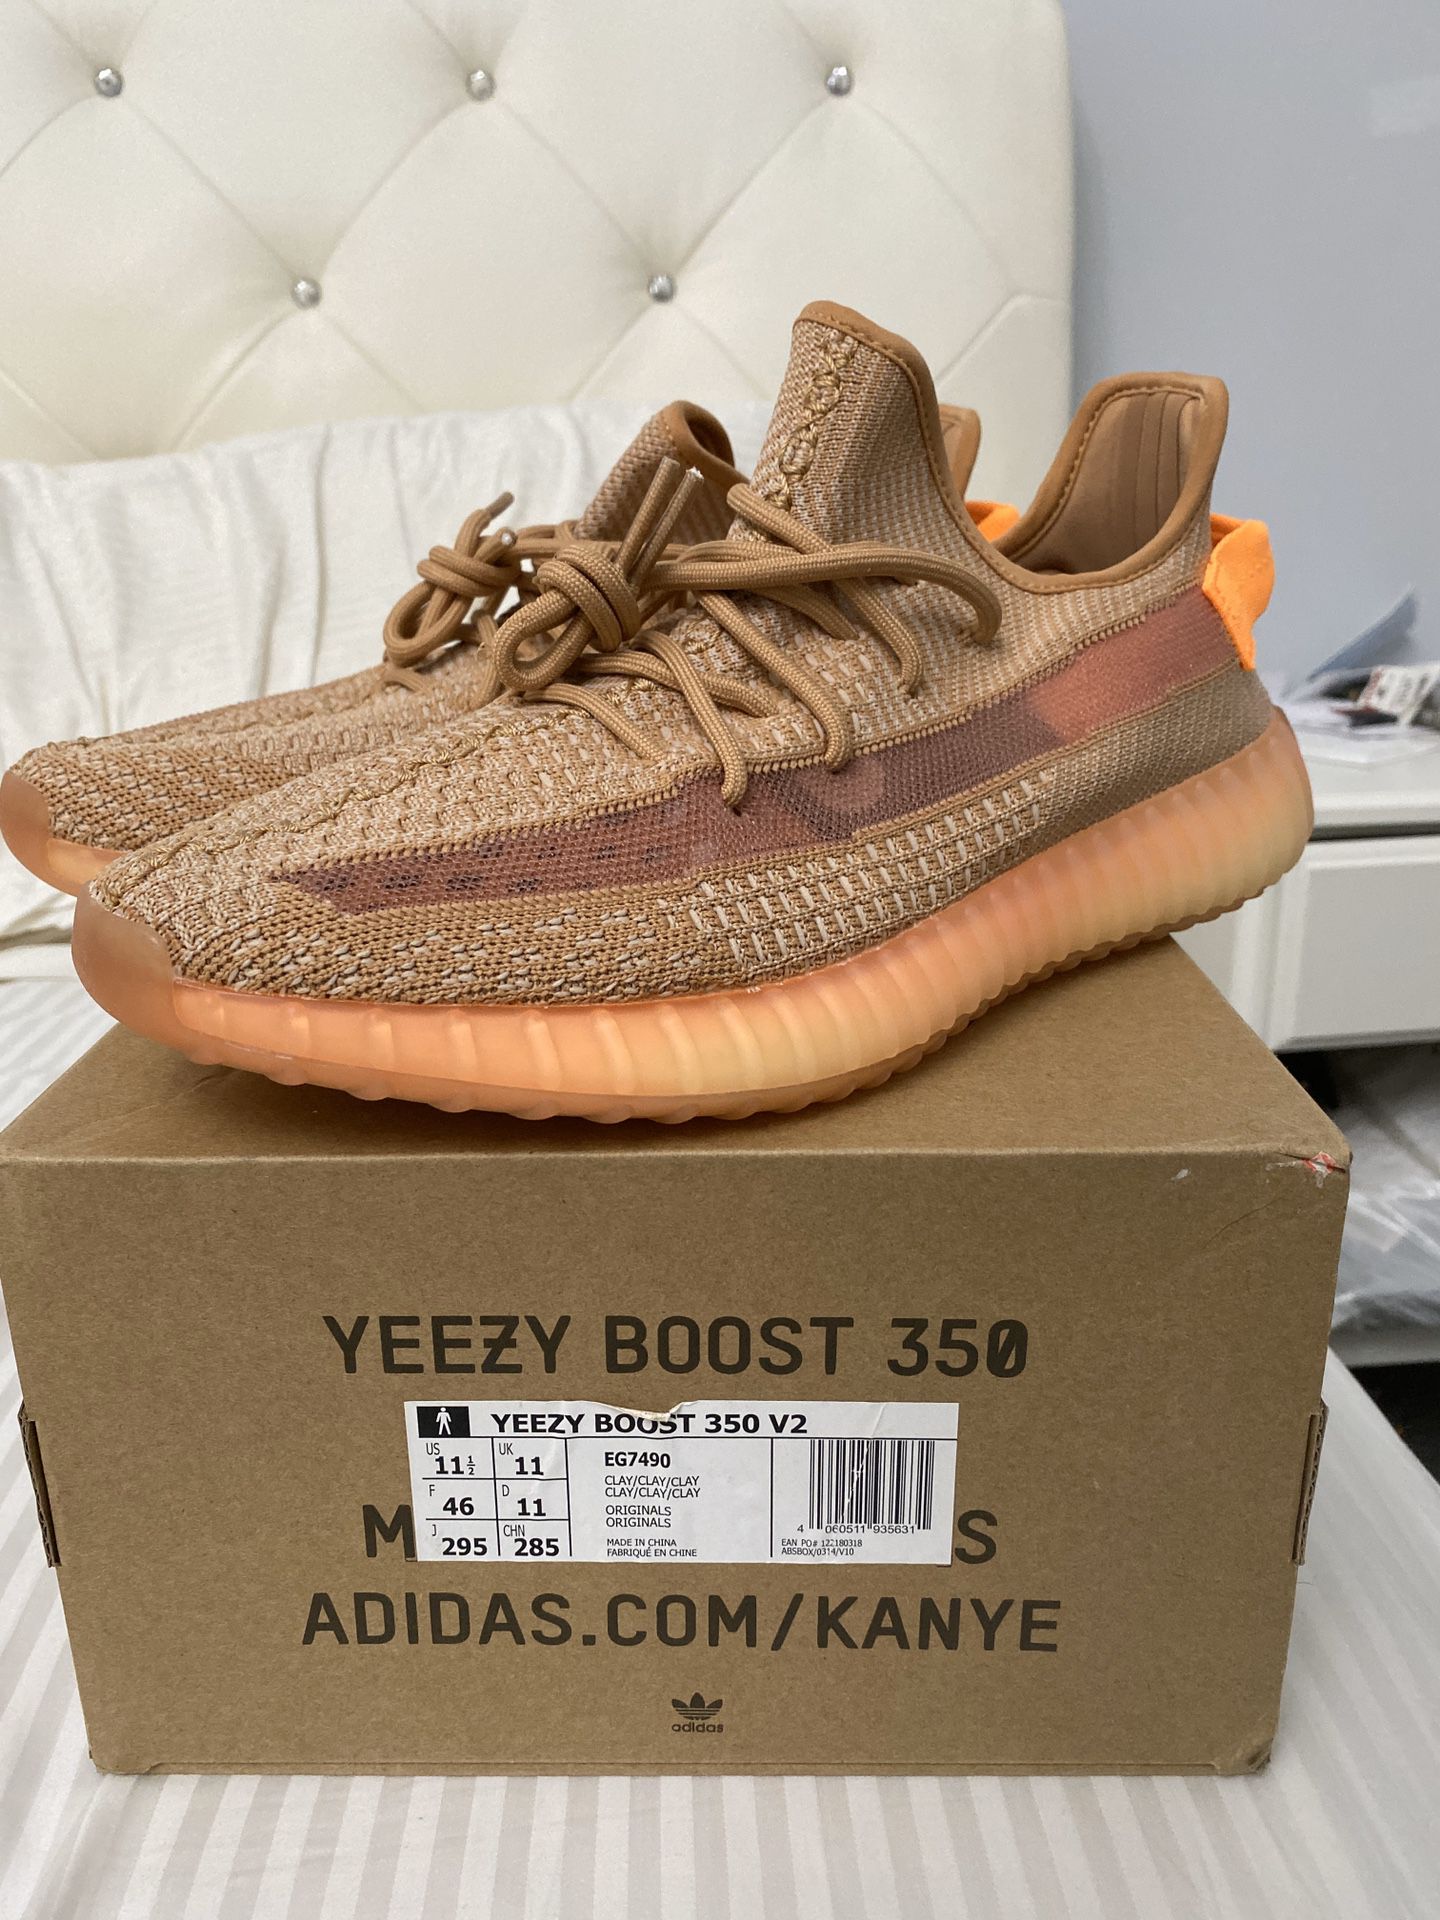 ADIDAS YEEZY BOOST 350 v2 clay size 11.5 brand new